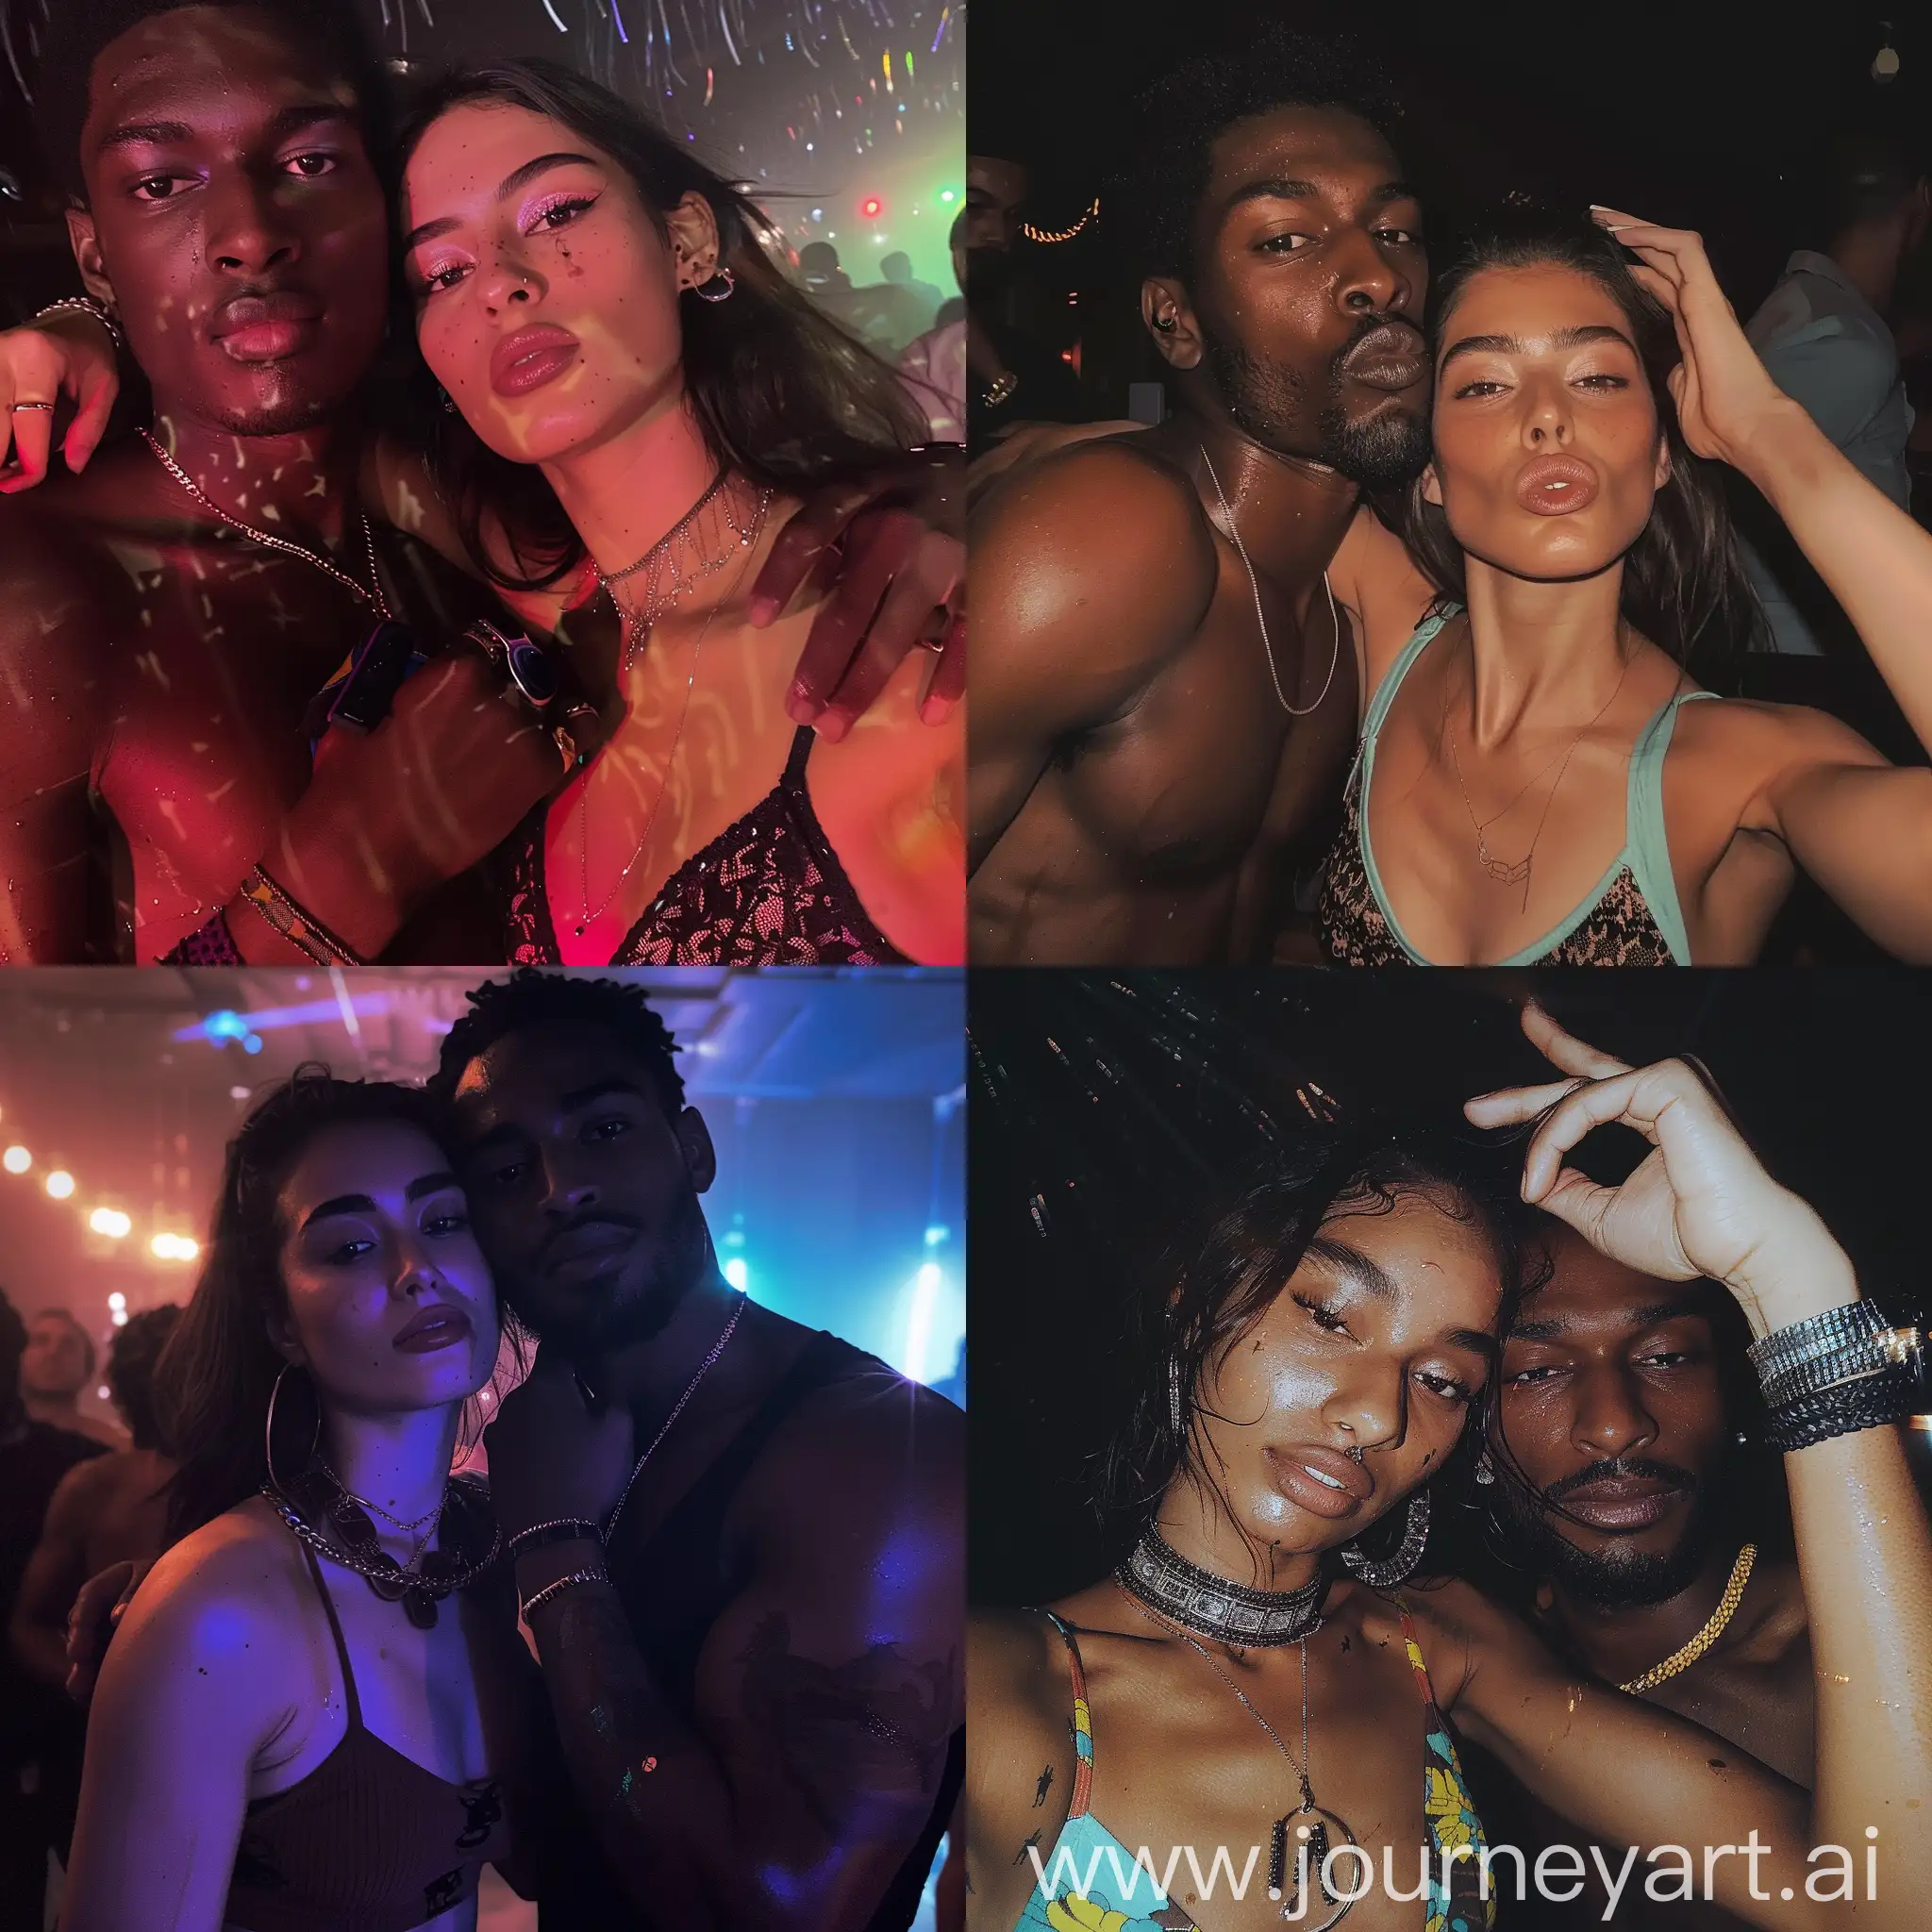 Aesthetic Instagram selfie of an Iraqi woman in a party club crop-top having the best time of her life. Her tall robust African man is holding her throat possessively with his hand. They are sweating. She is doing the duck lips pose, and both are looking at the camera. the woman is beautiful and looks typically Iraqi